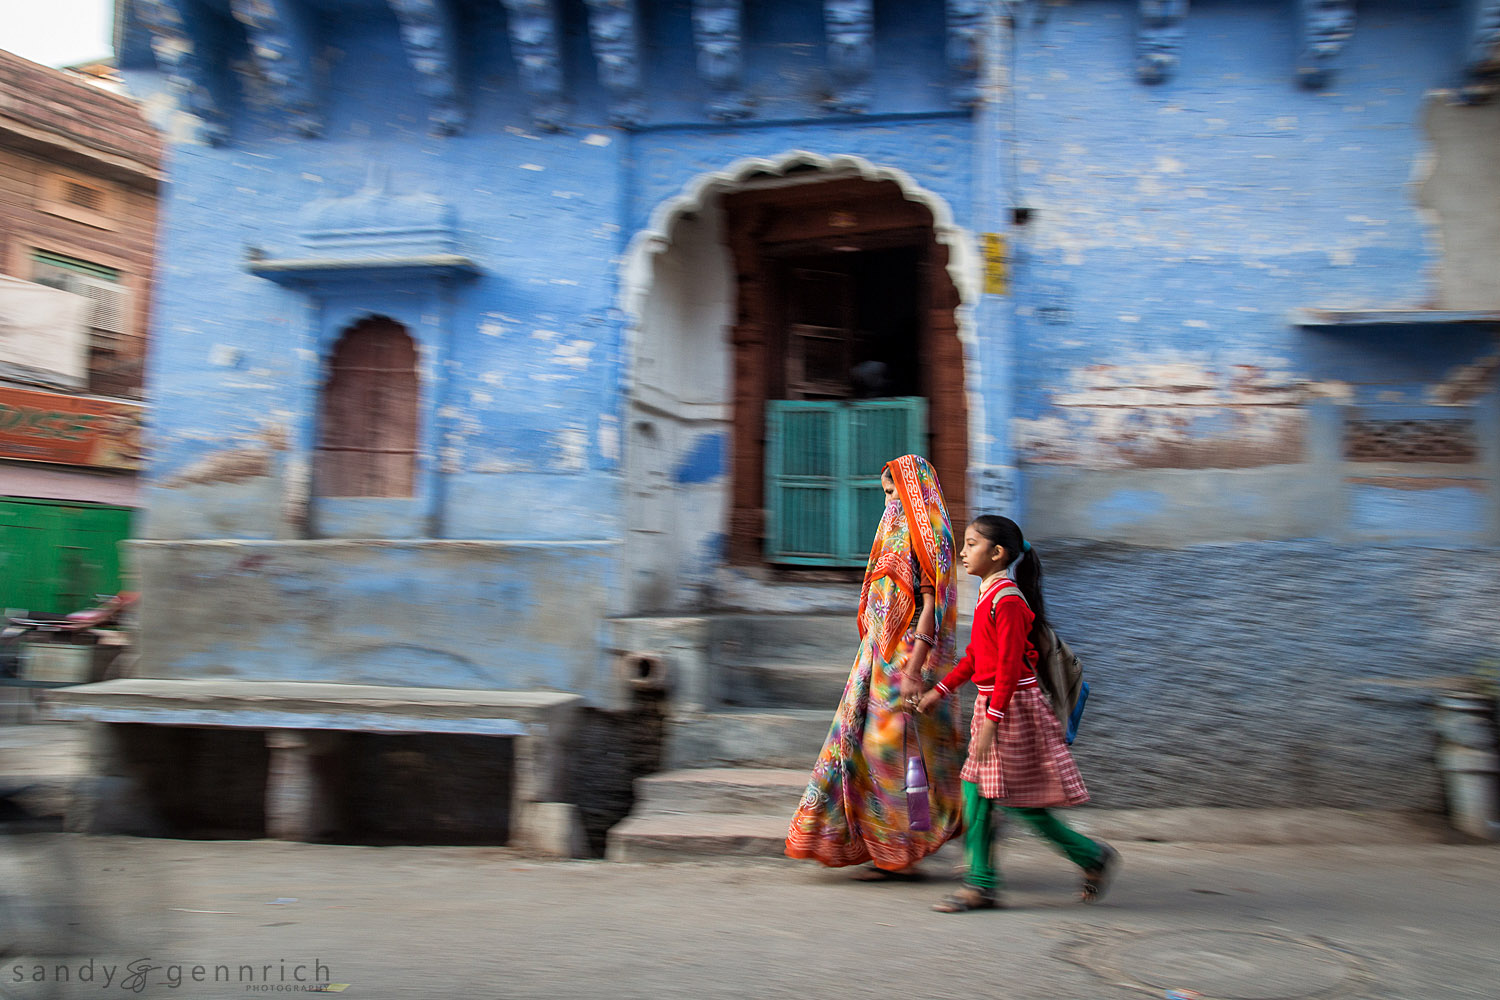 Going to School-India in Motion-Jodhpur-India